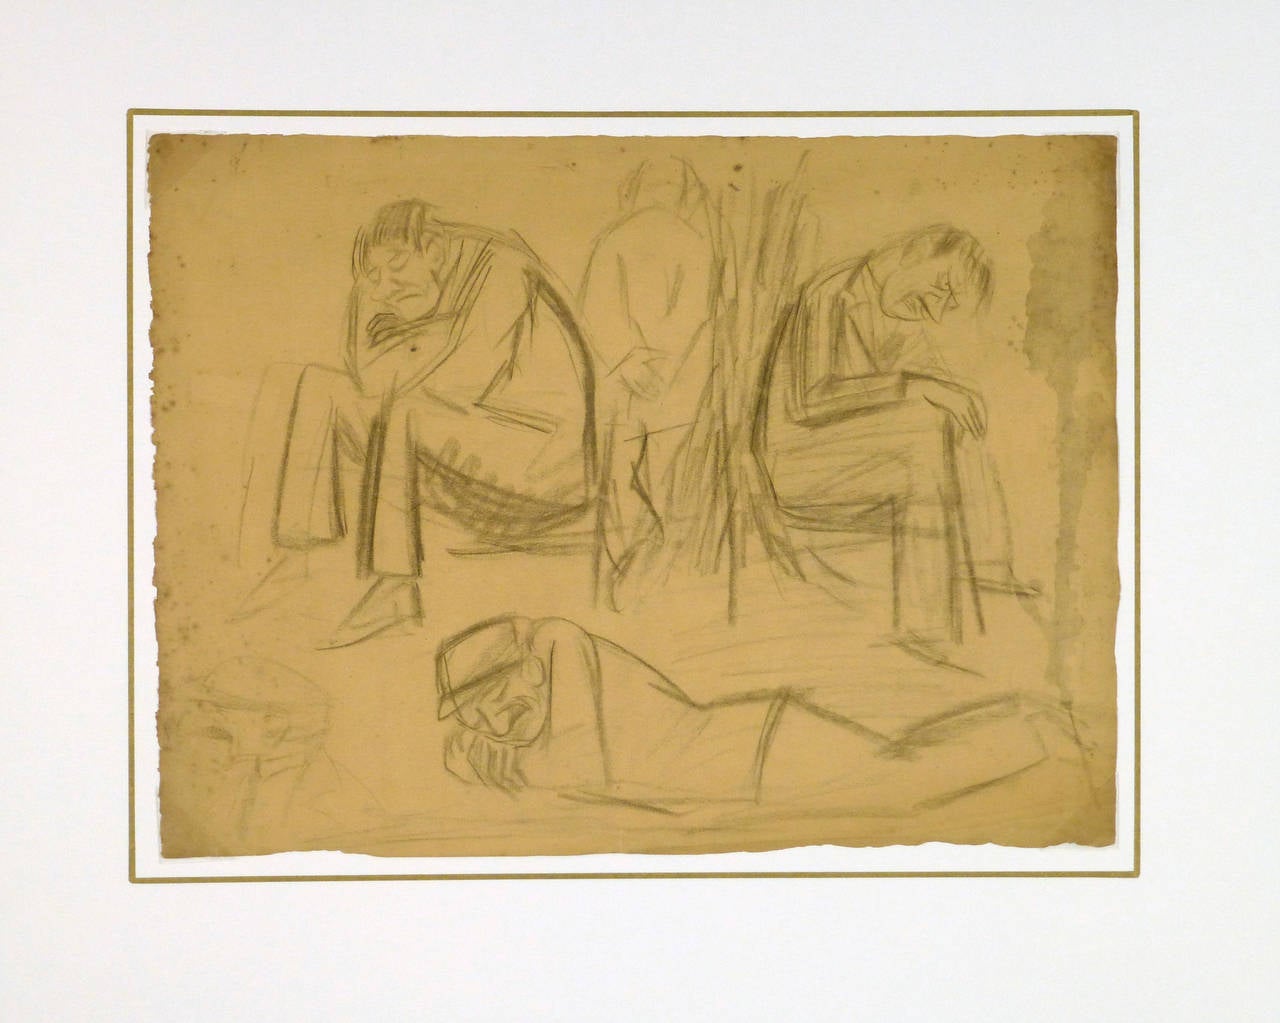 Expressive charcoal sketch of male figures in different states of repose, circa 1930.

Original vintage one-of-a-kind artwork on paper displayed on a white mat with a gold border. Mat fits a standard-size frame. Archival plastic sleeve and